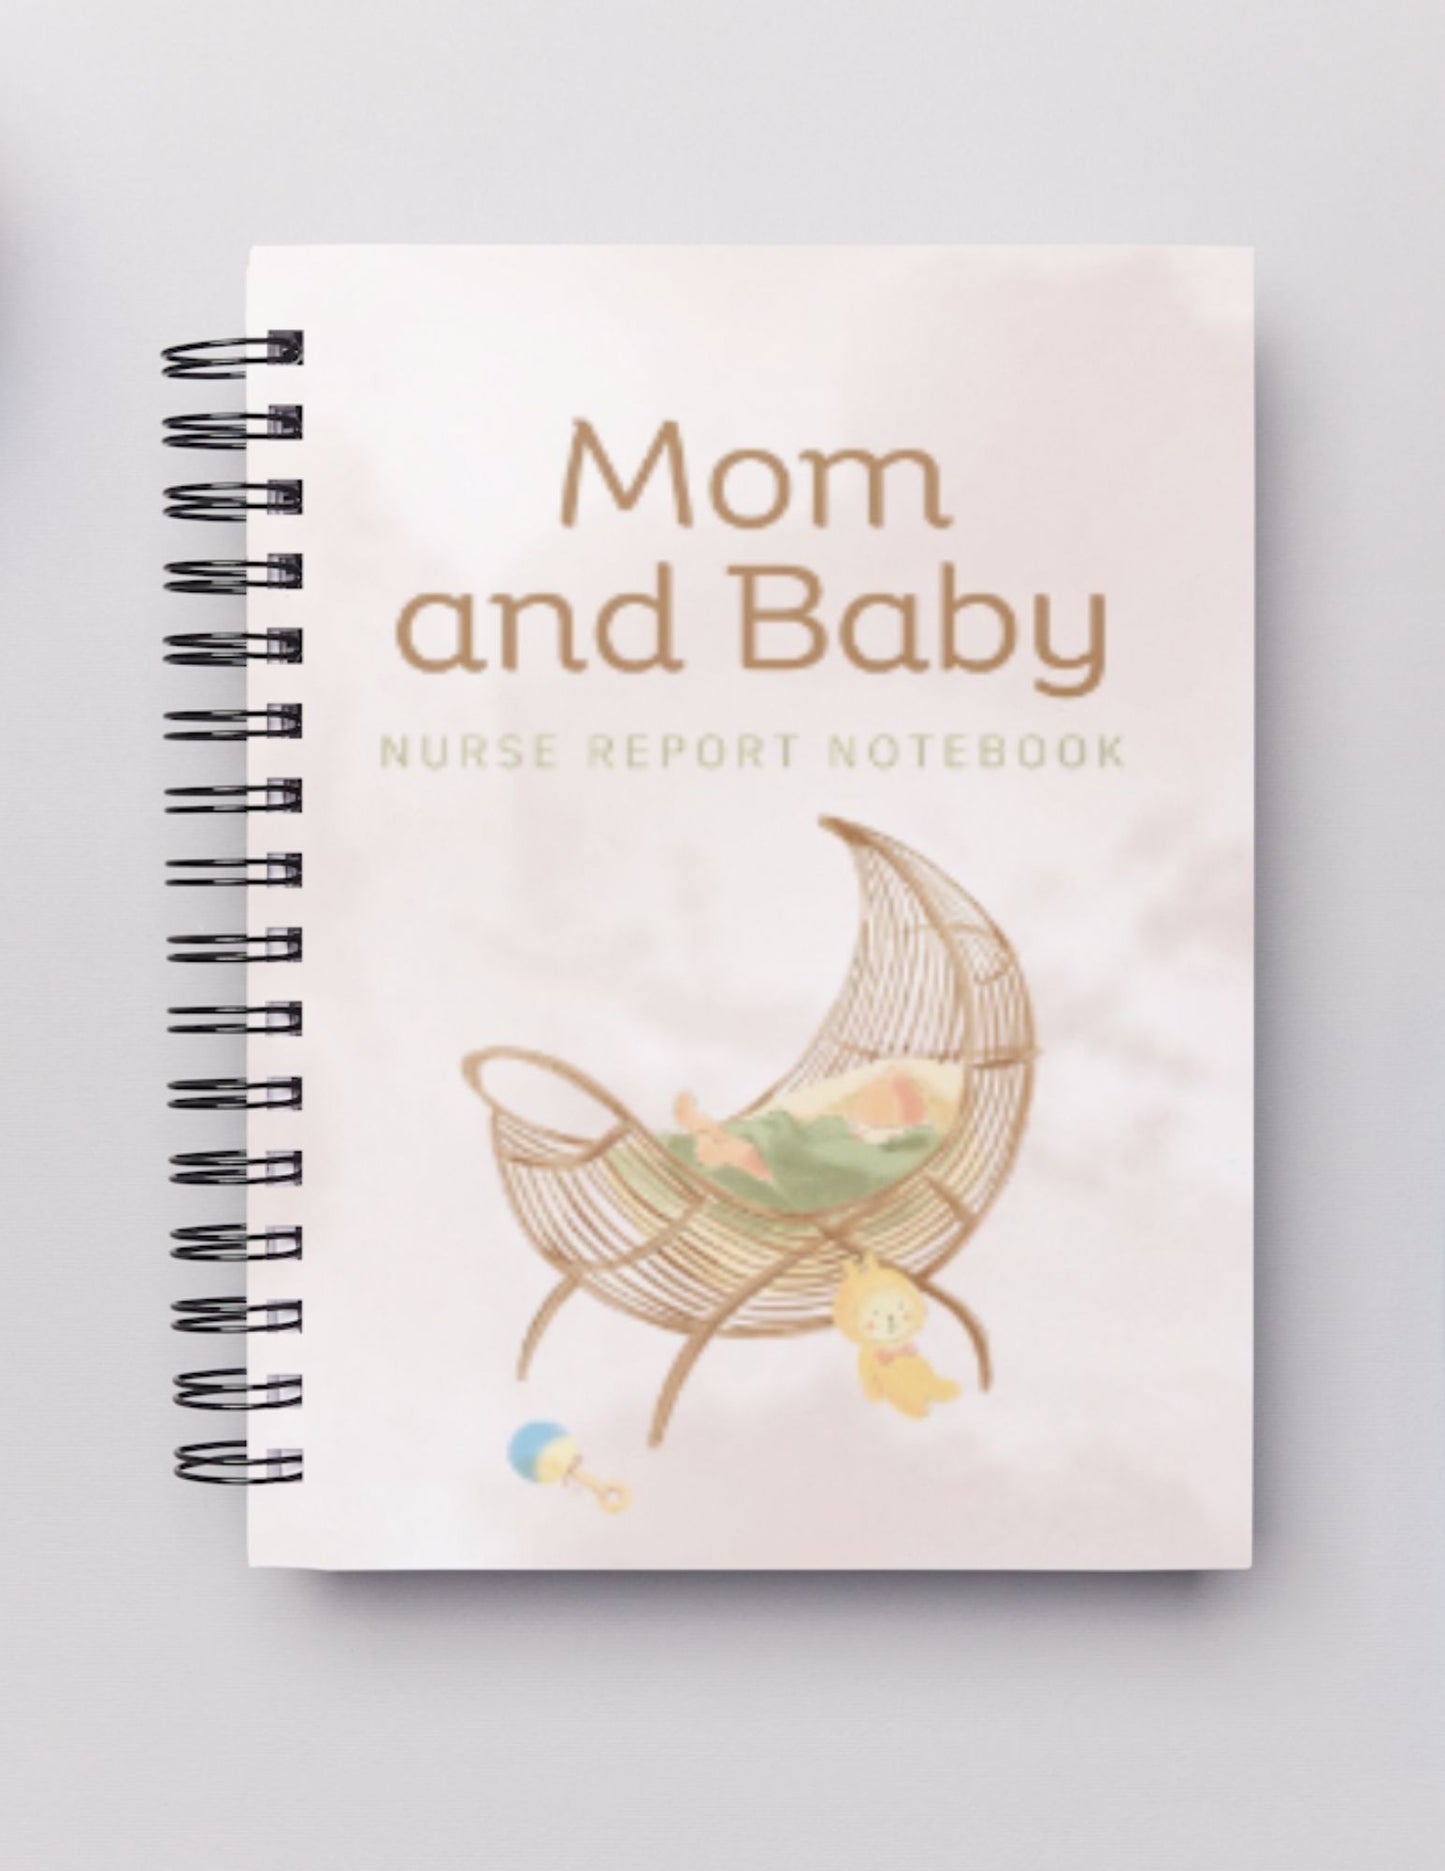 Mom and Baby (2 Couplets) Nurse Report Notebook